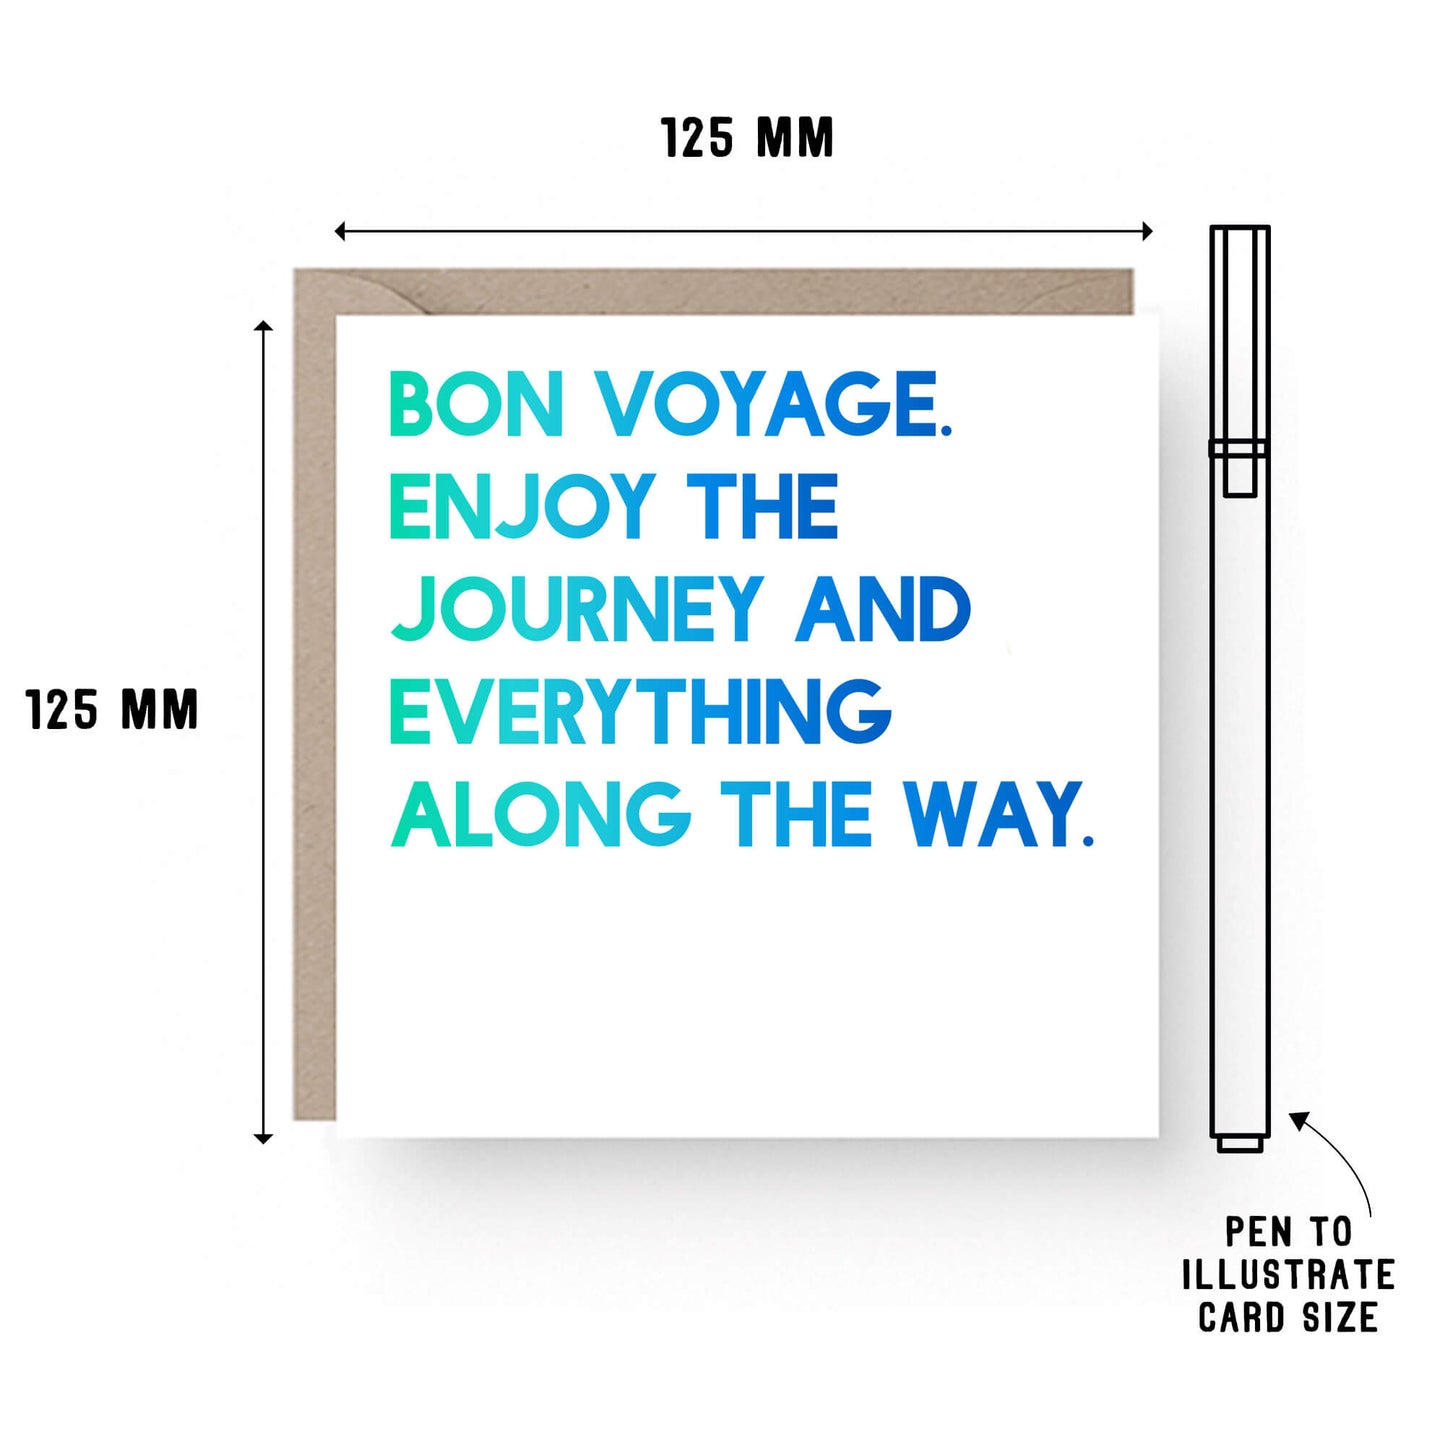 Bon Voyage Card by SixElevenCreations. Reads Bon Voyage. Enjoy the journey and everything along the way. Product Code SE0014SQ